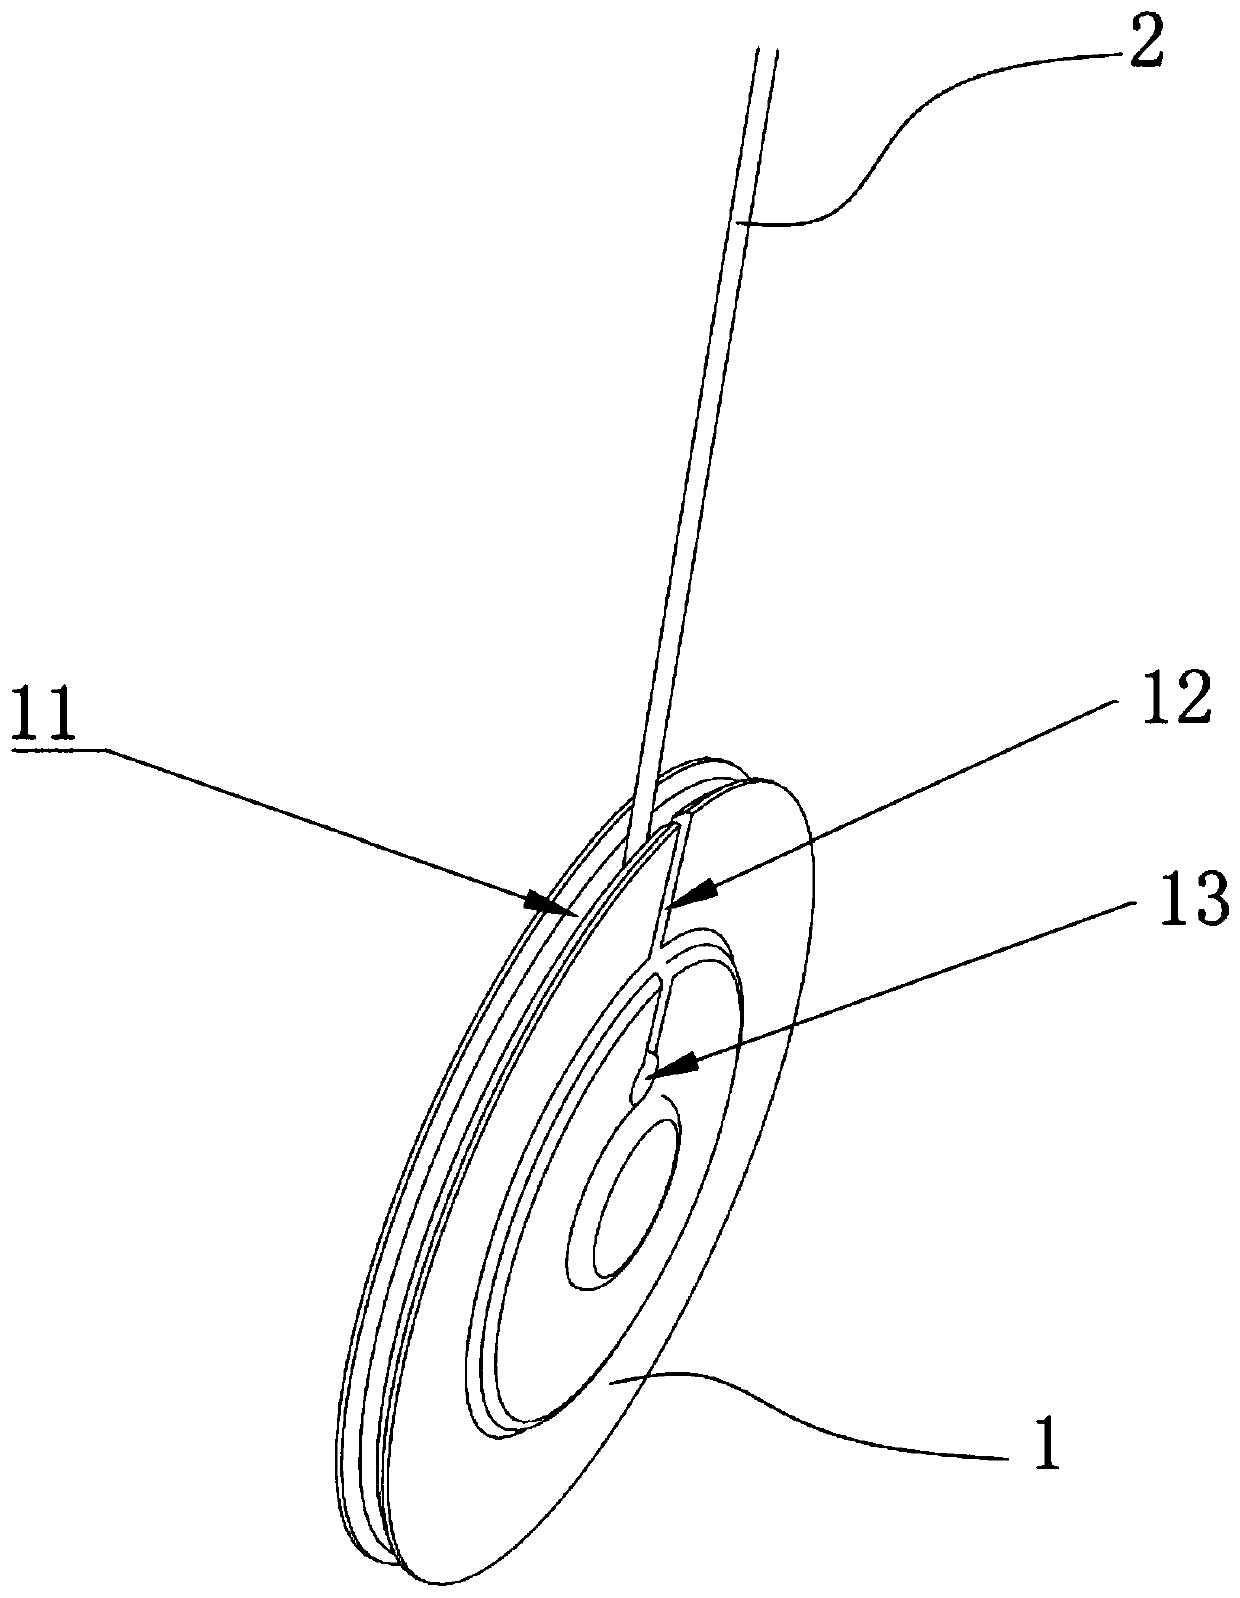 Wire winding structure and clothes hanger hand cranking device